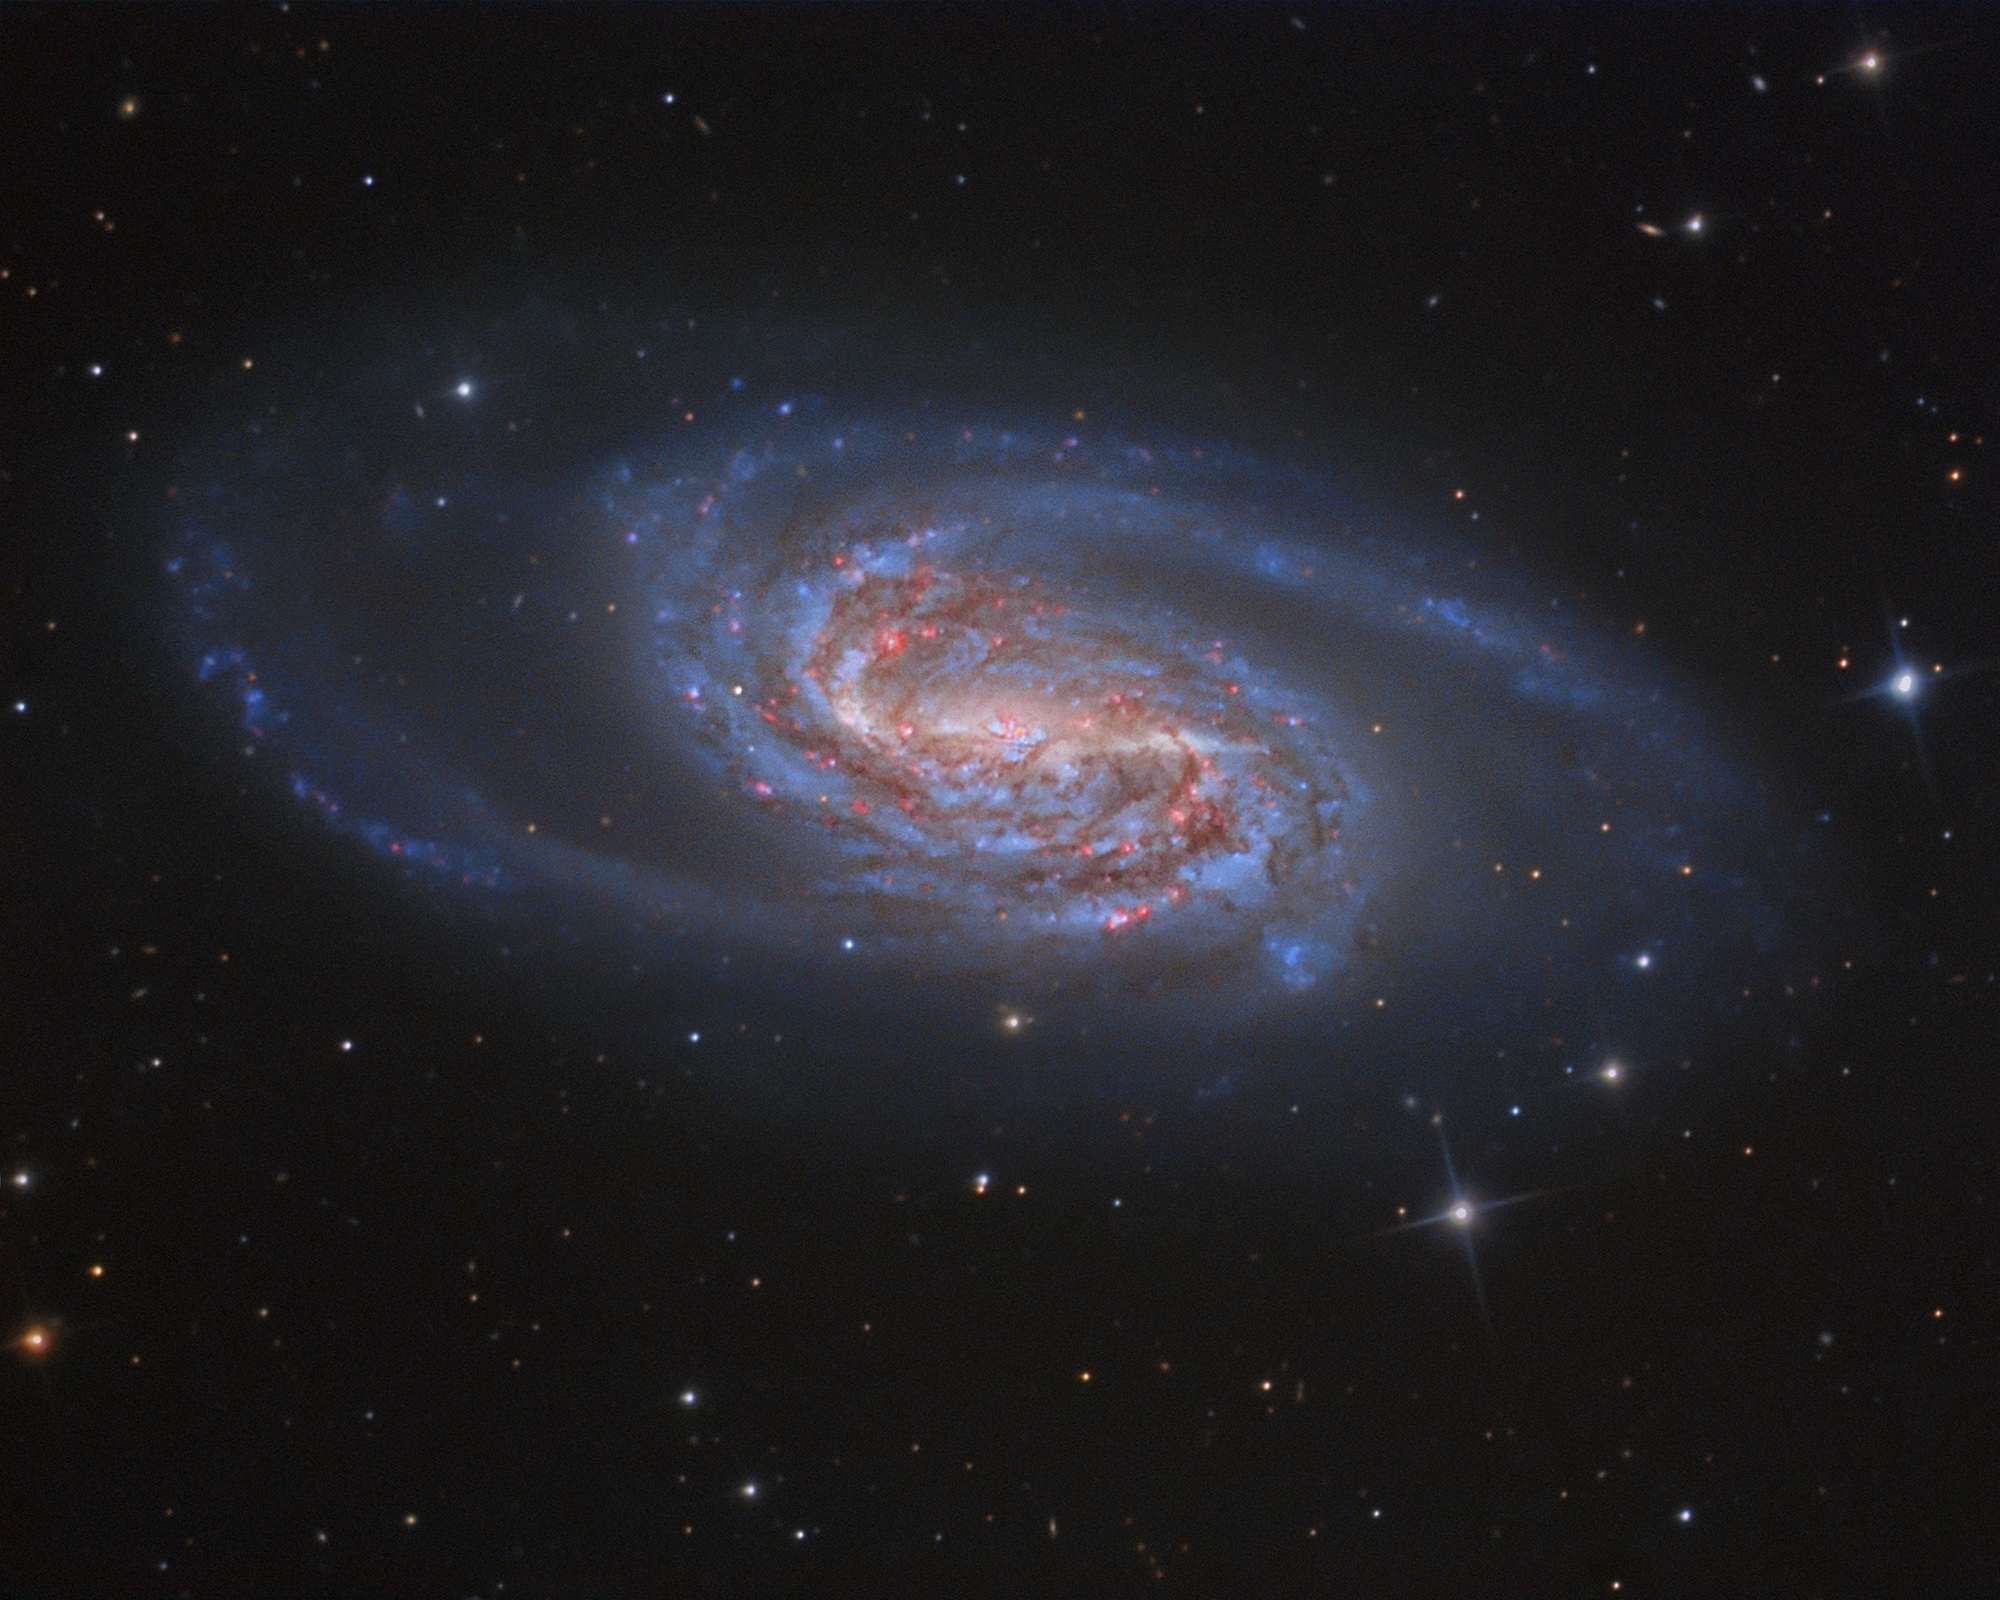 NGC 2903: A Missing Jewel in Leo